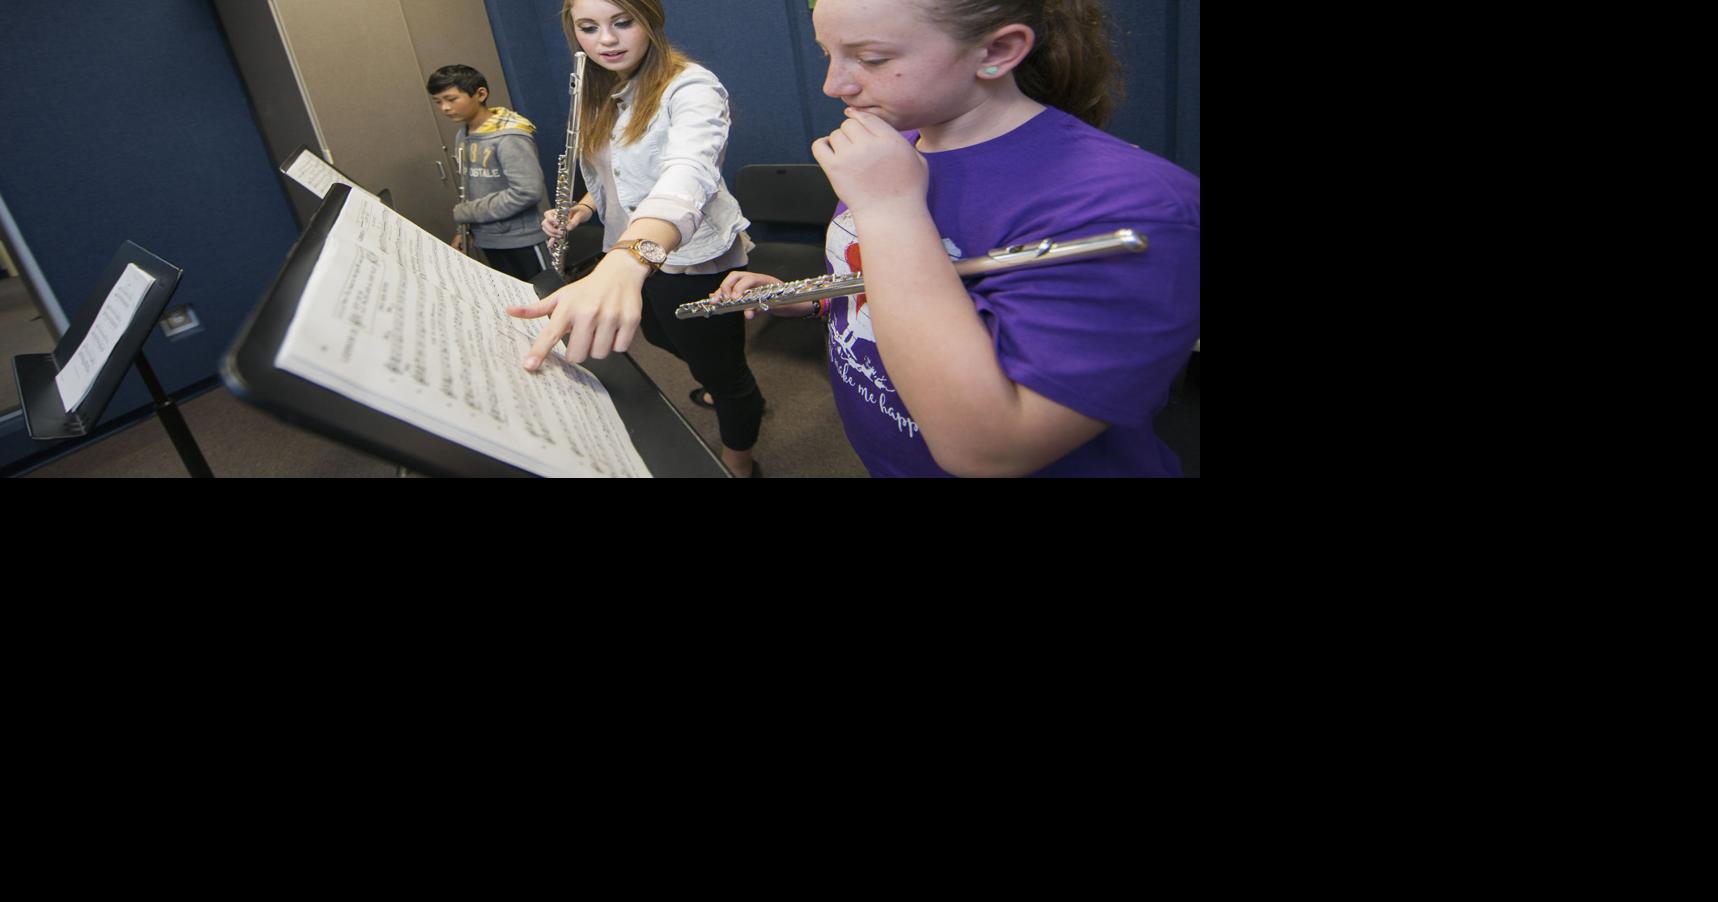 Crane School of Music offering free music lessons for local children ...